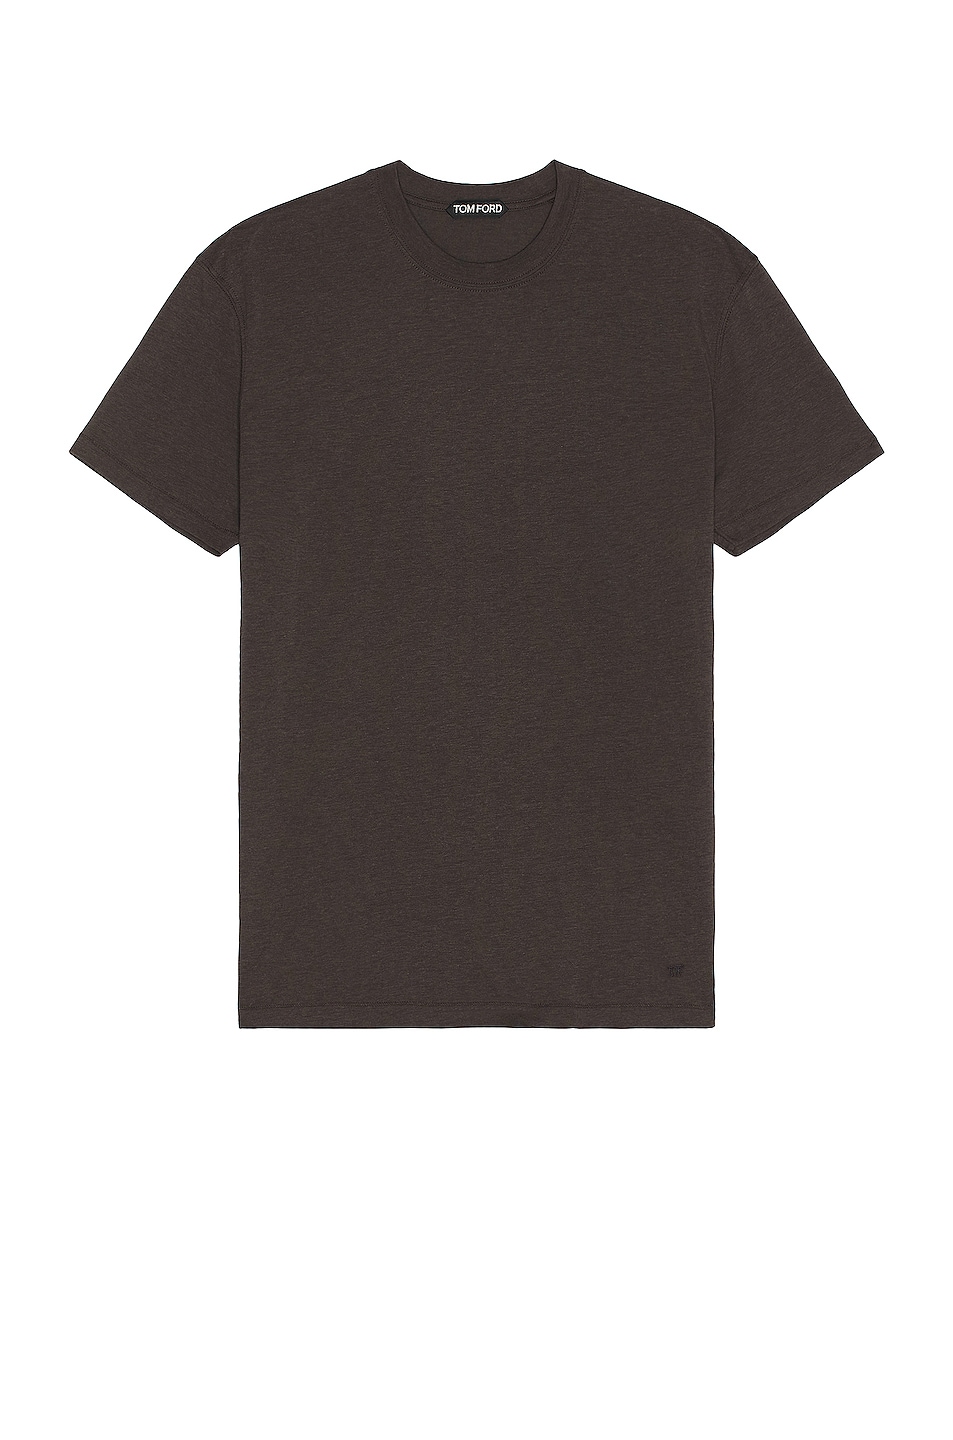 Image 1 of TOM FORD Crewneck T-shirt in Dark Chocolate